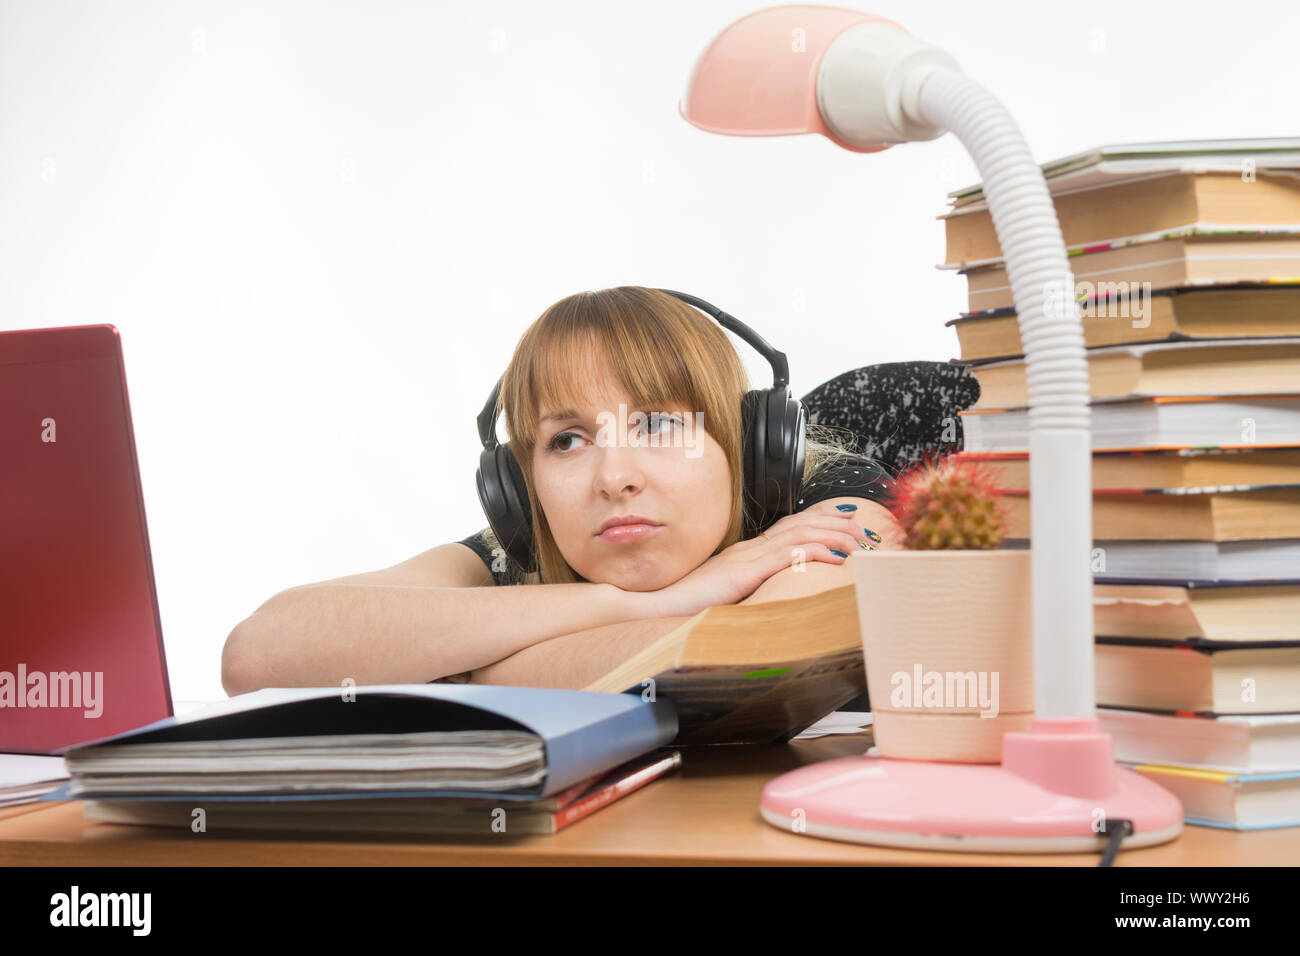 Girl sad student sitting at the table wearing headphones and listening to music Stock Photo